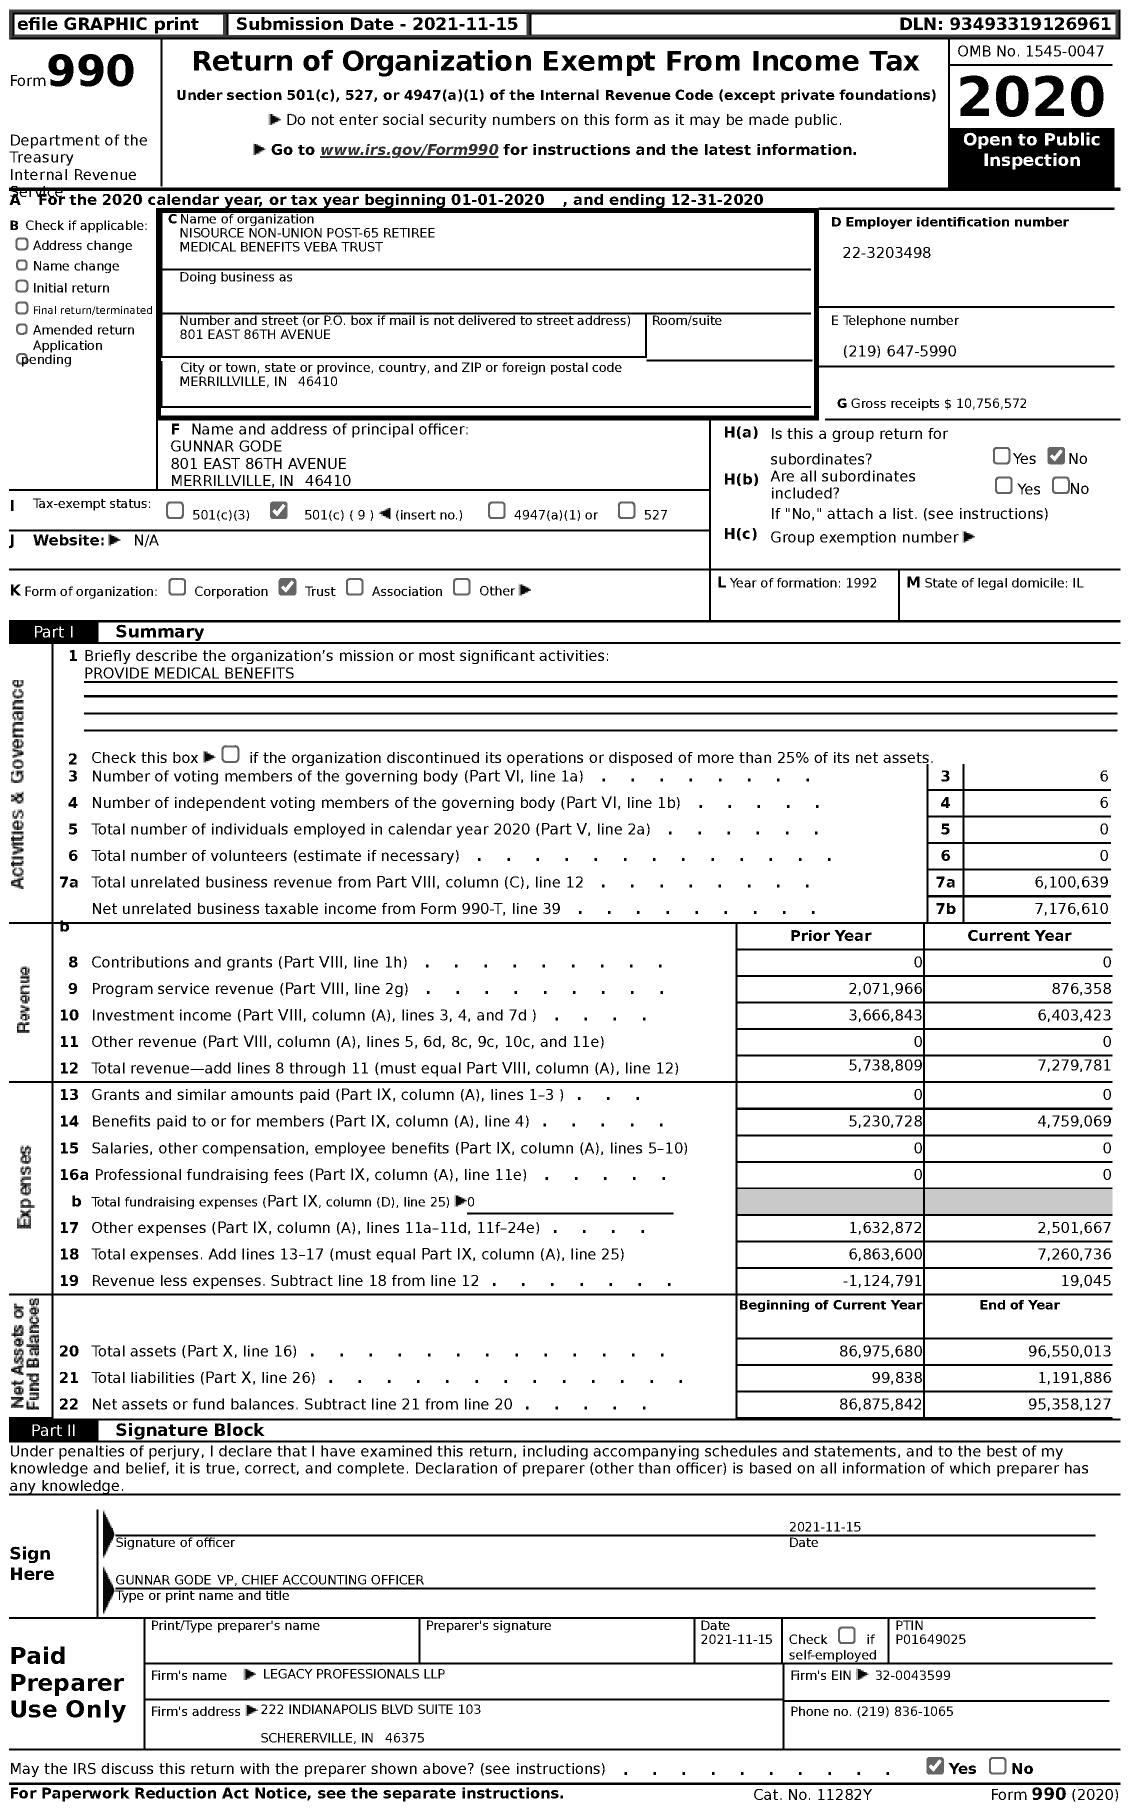 Image of first page of 2020 Form 990 for Nisource Non-Union Post-65 Retiree Medical Benefits Veba Trust